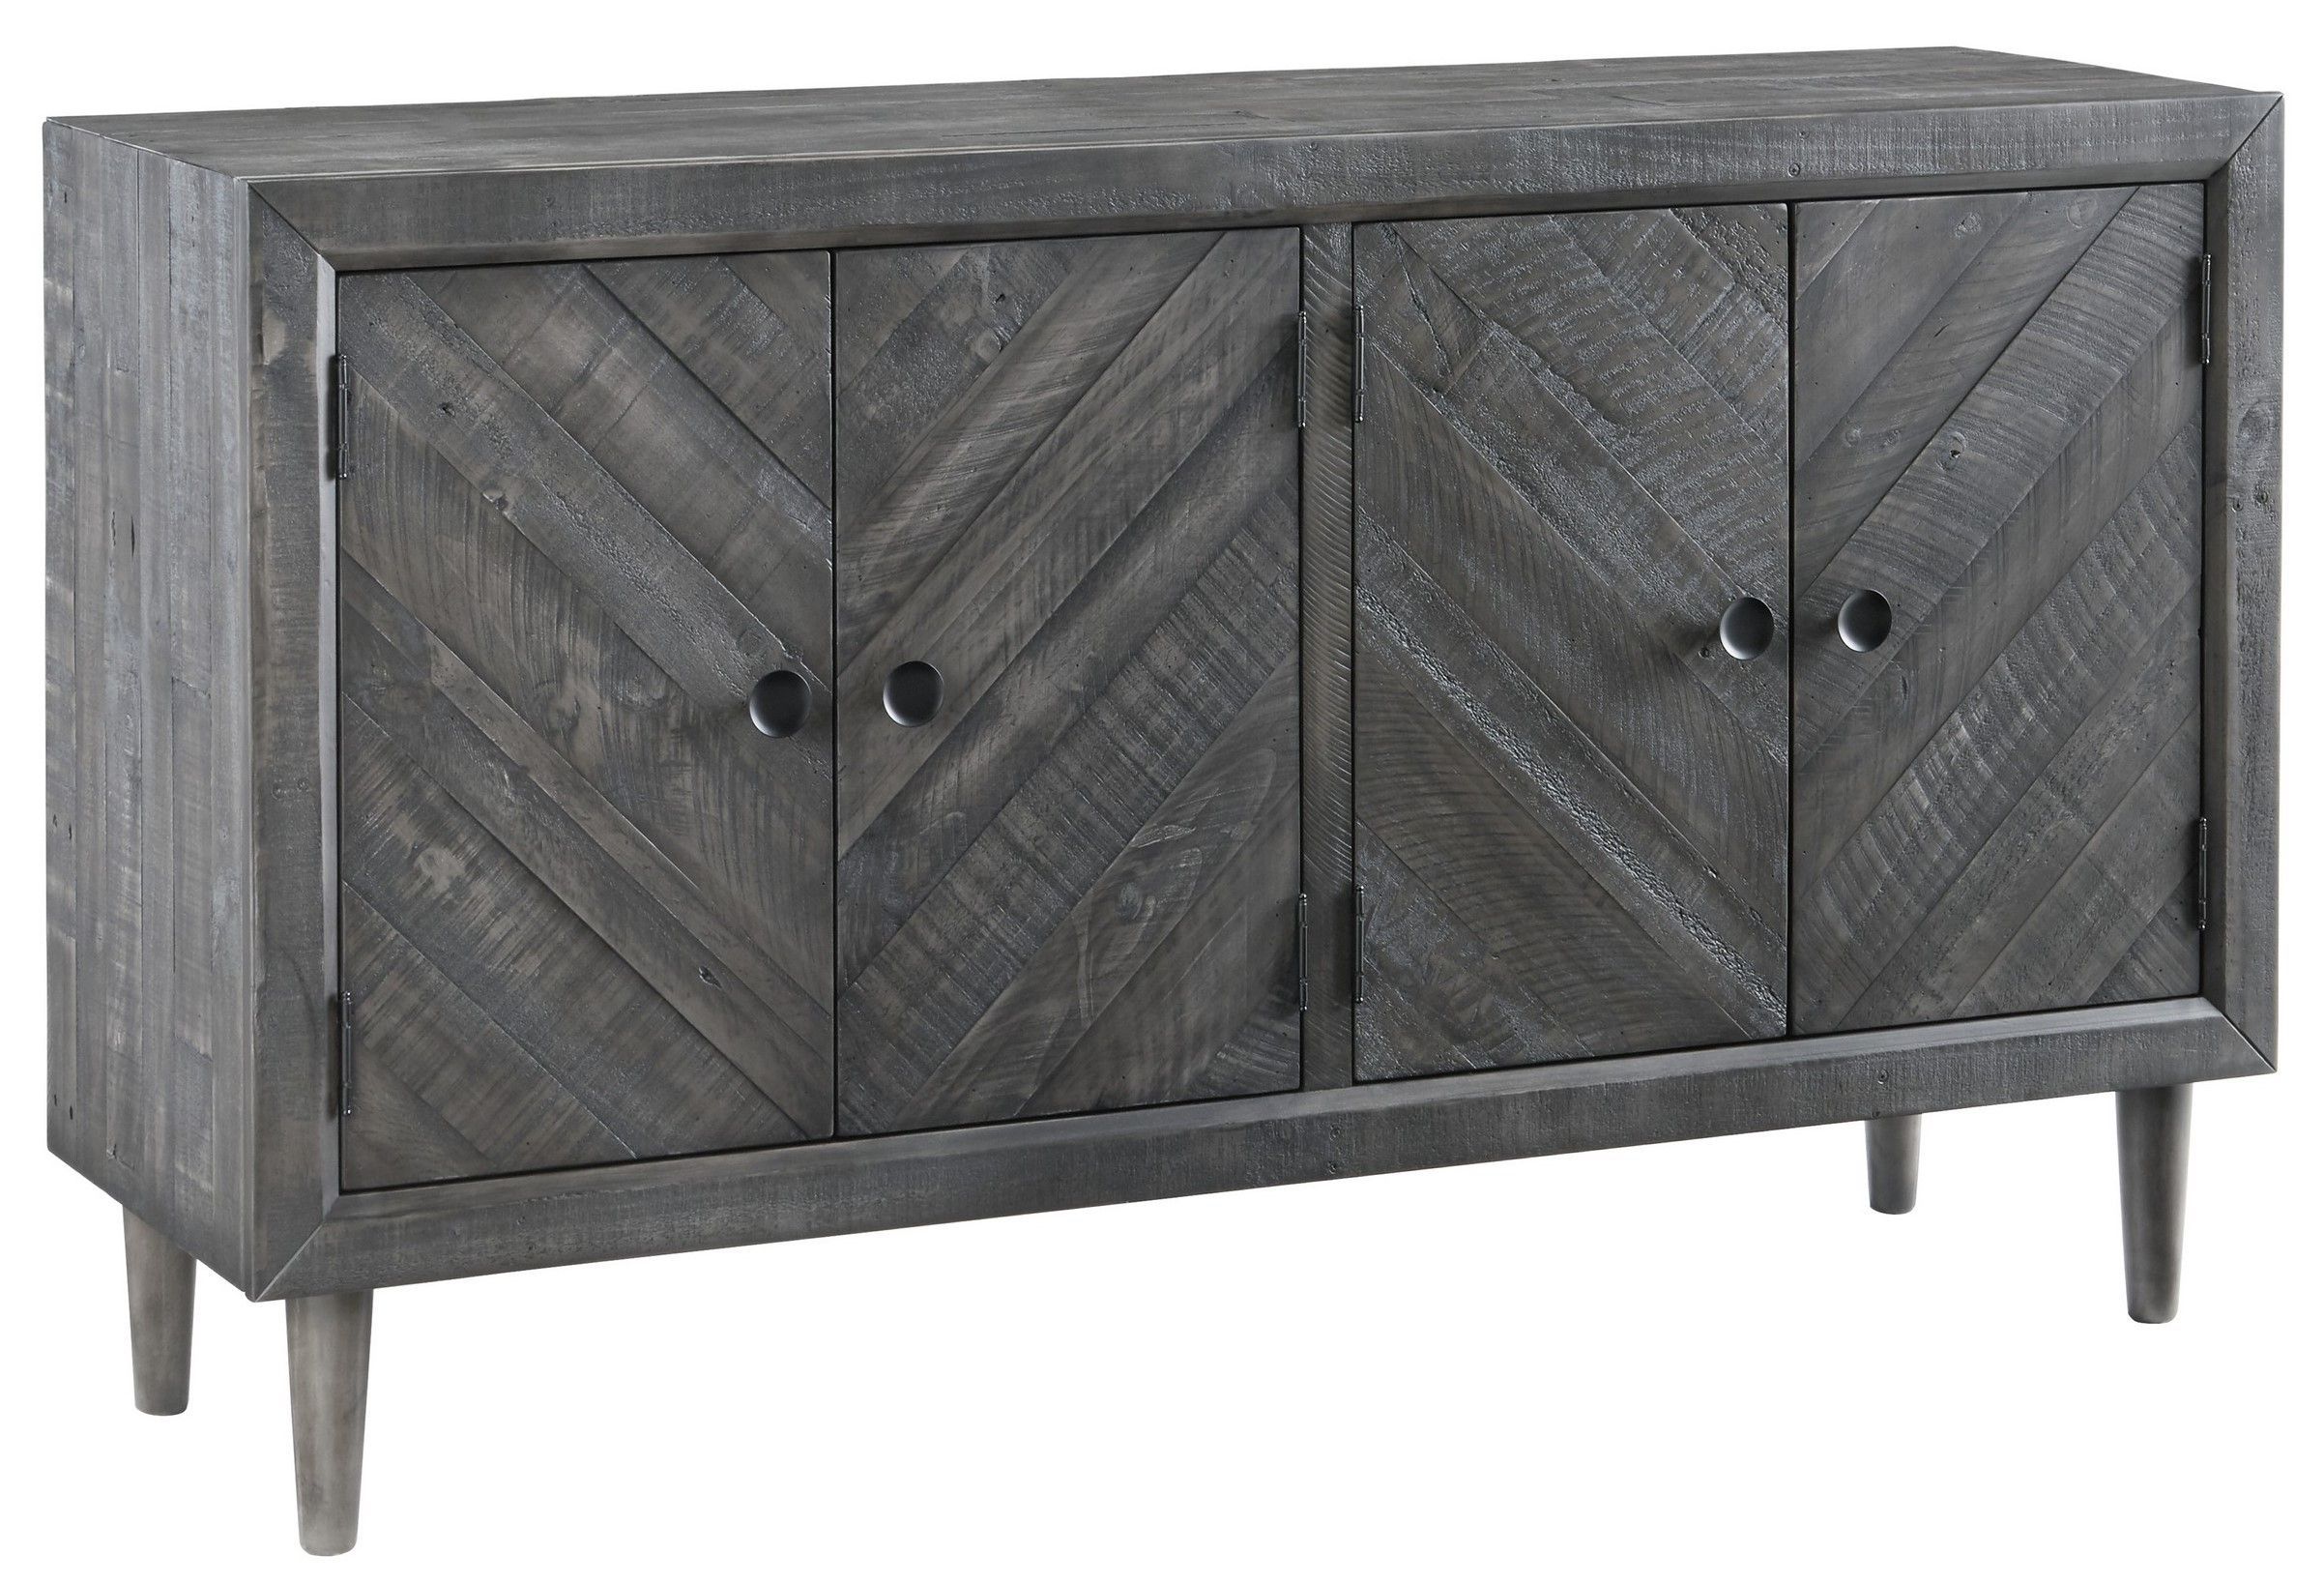 Signature Designashley D568 60 | Hot Sellers | Pinterest For Wakefield 97 Inch Tv Stands (View 22 of 30)